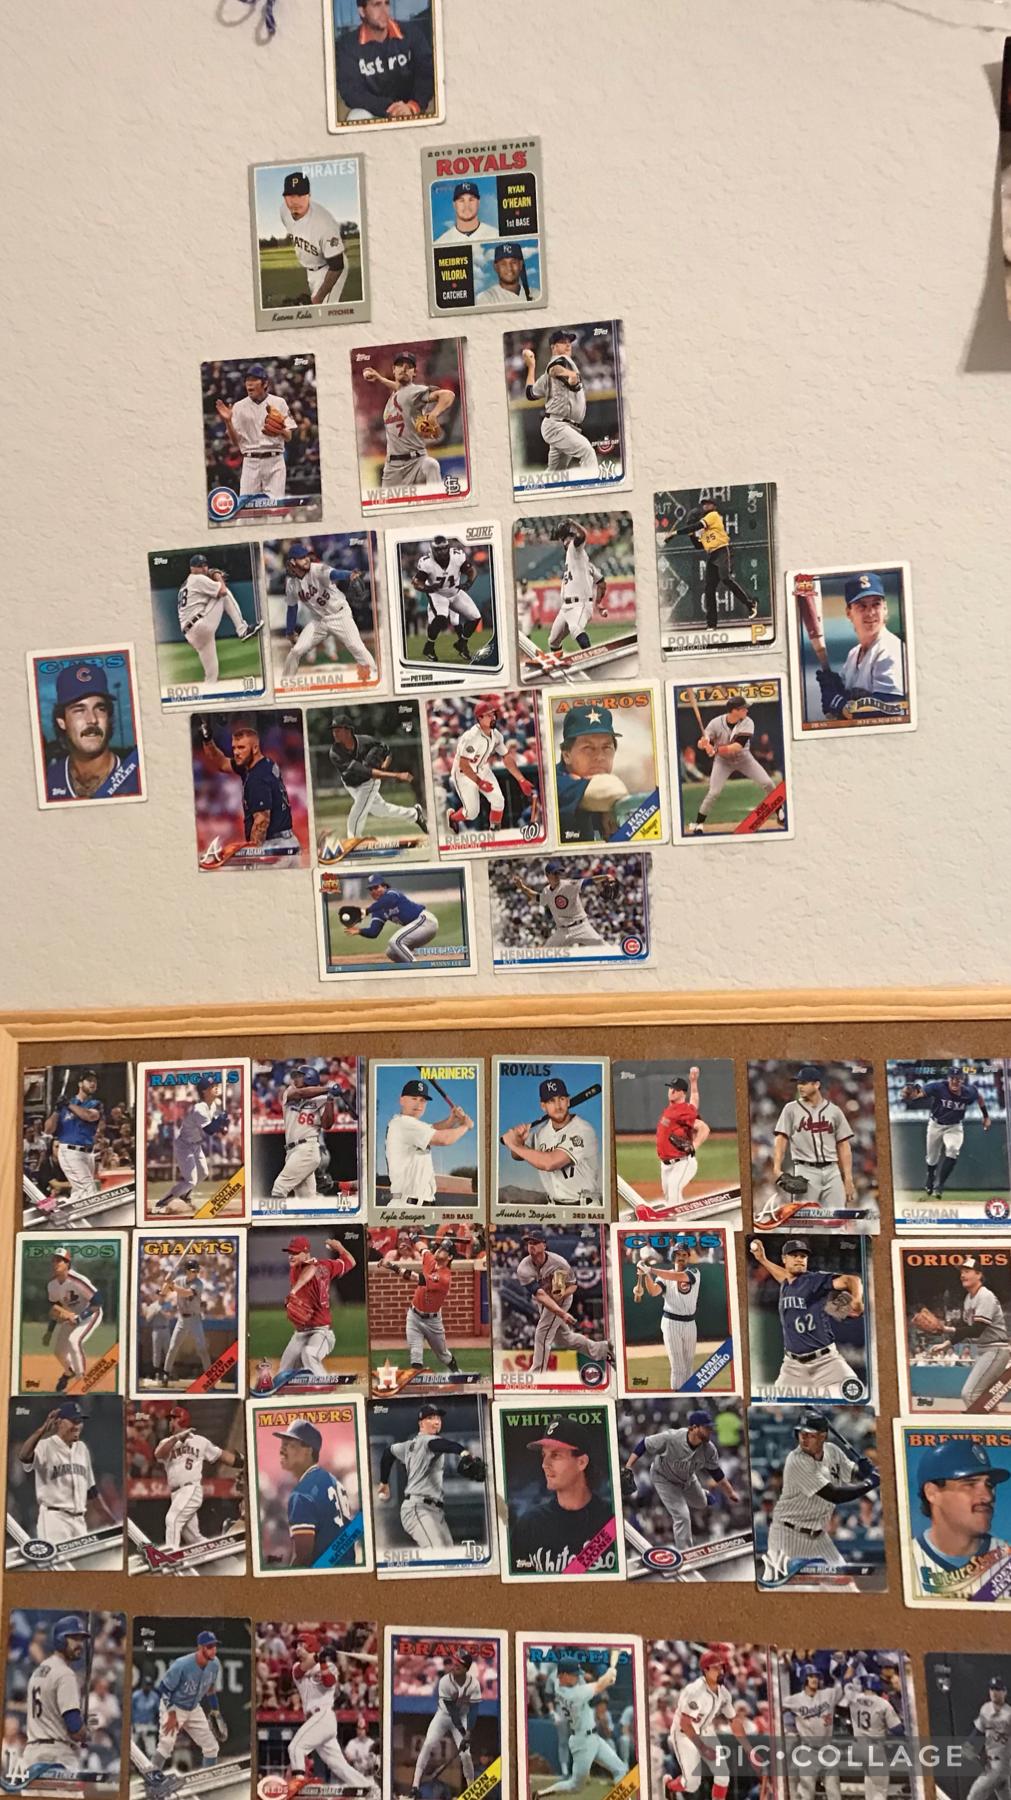 Look at this baseball cards my brother has!!!🤨🙄😮